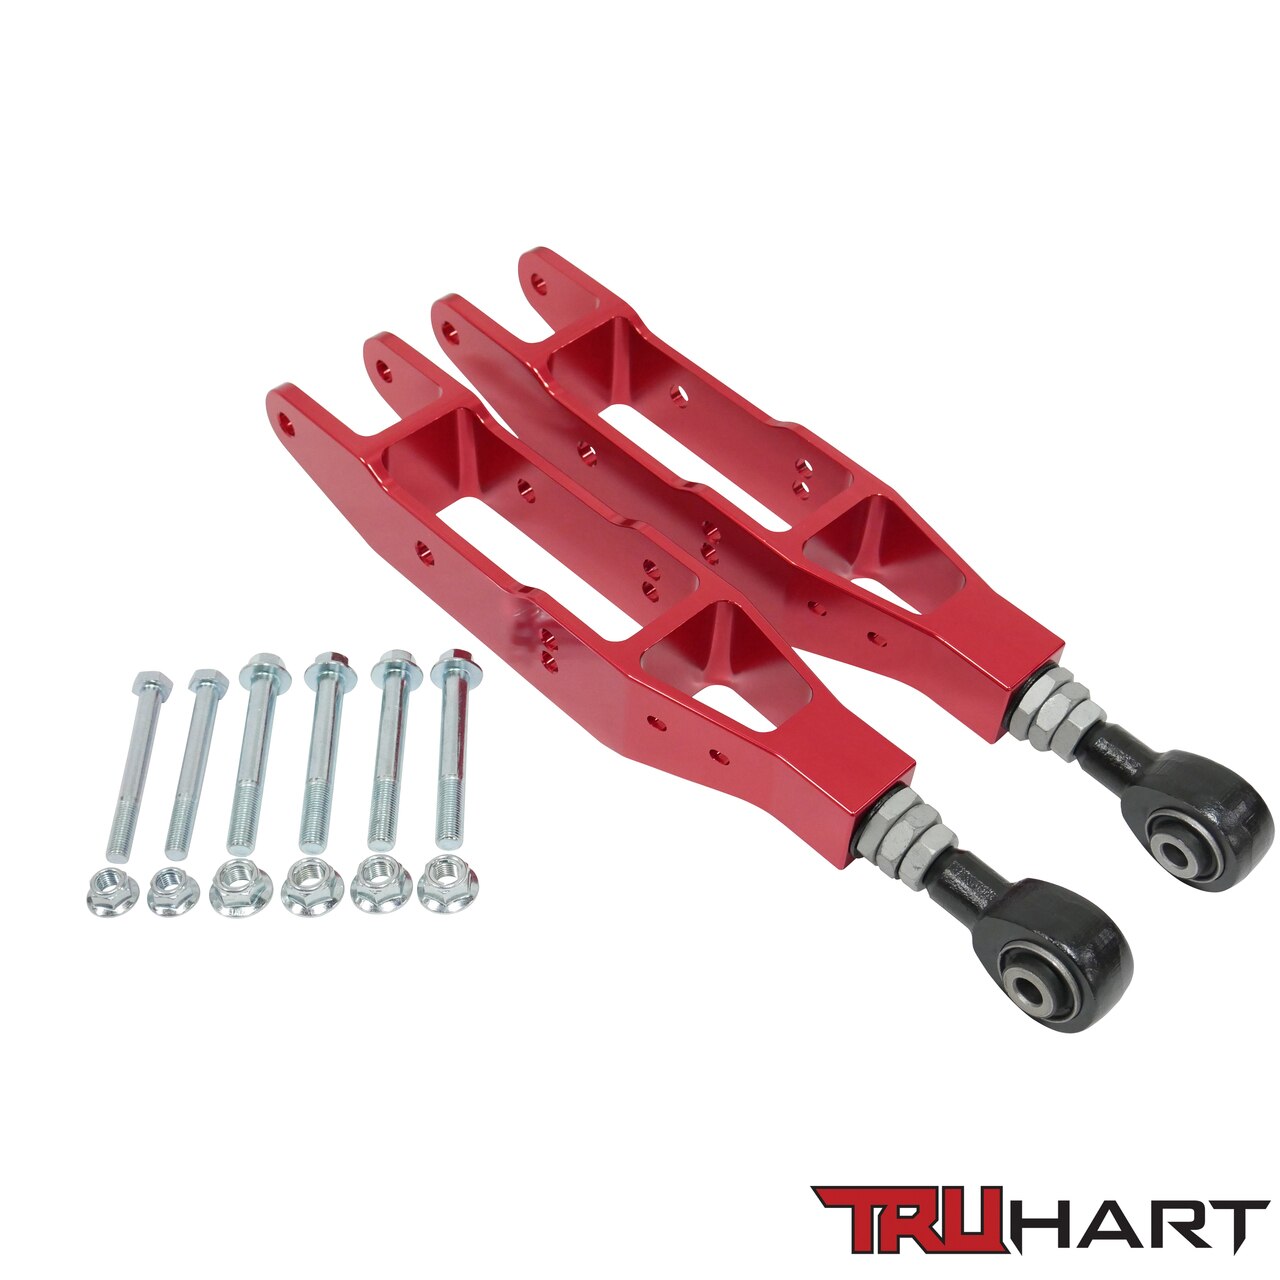 TruHart - Rear Lower Control Arms - Adjustable - Anodized Red - TH-S108-RE - NextGen Tuning